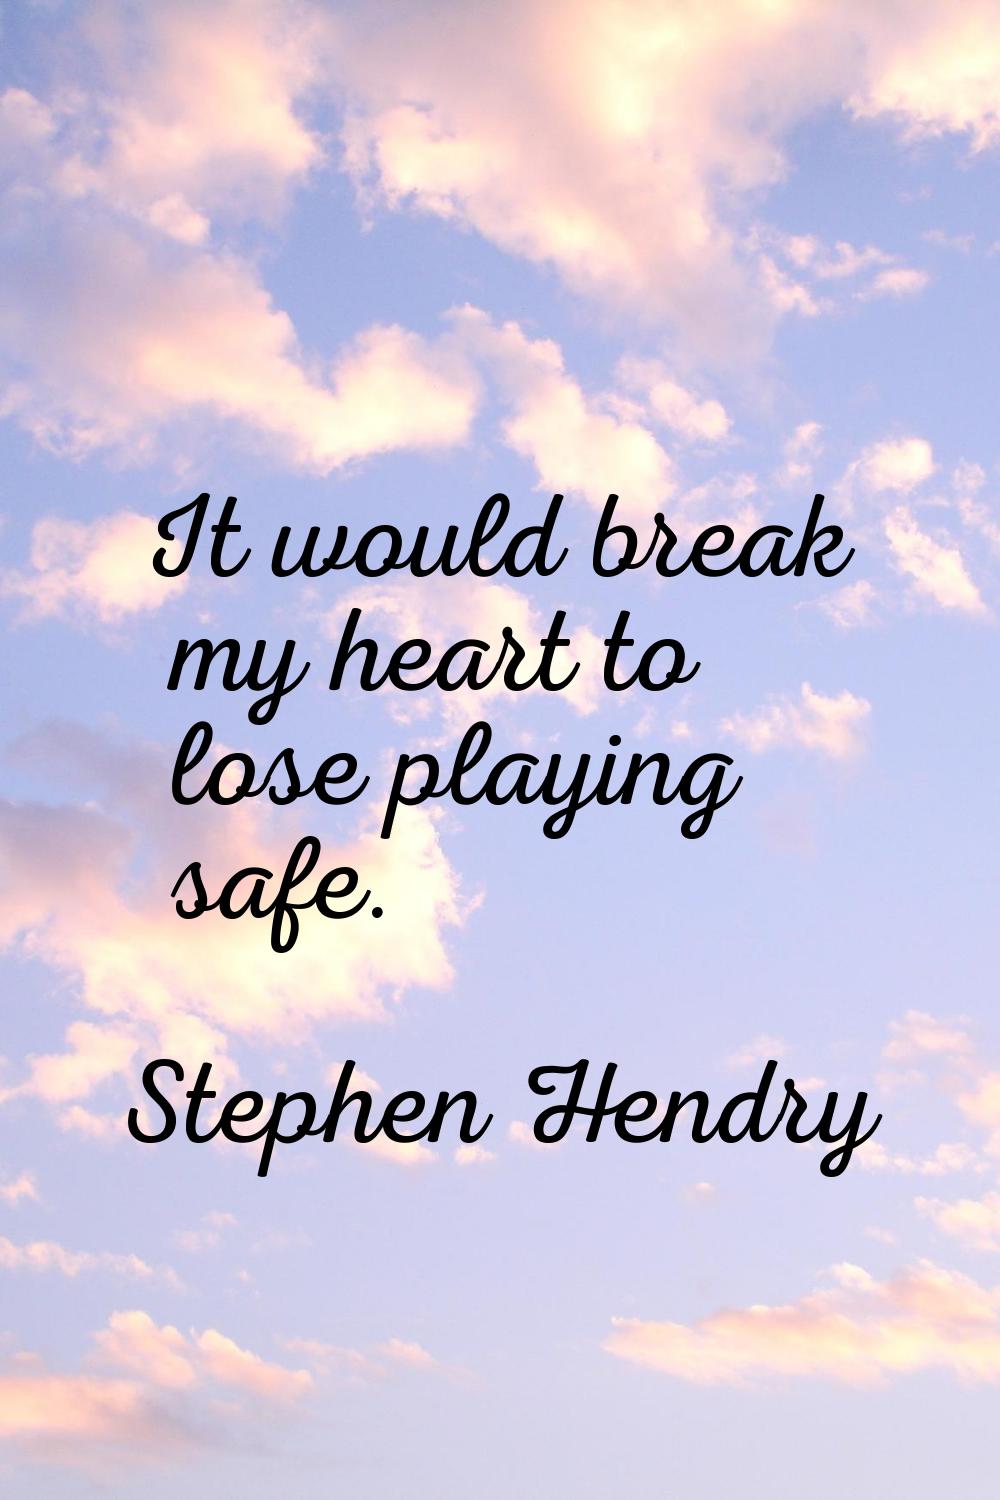 It would break my heart to lose playing safe.